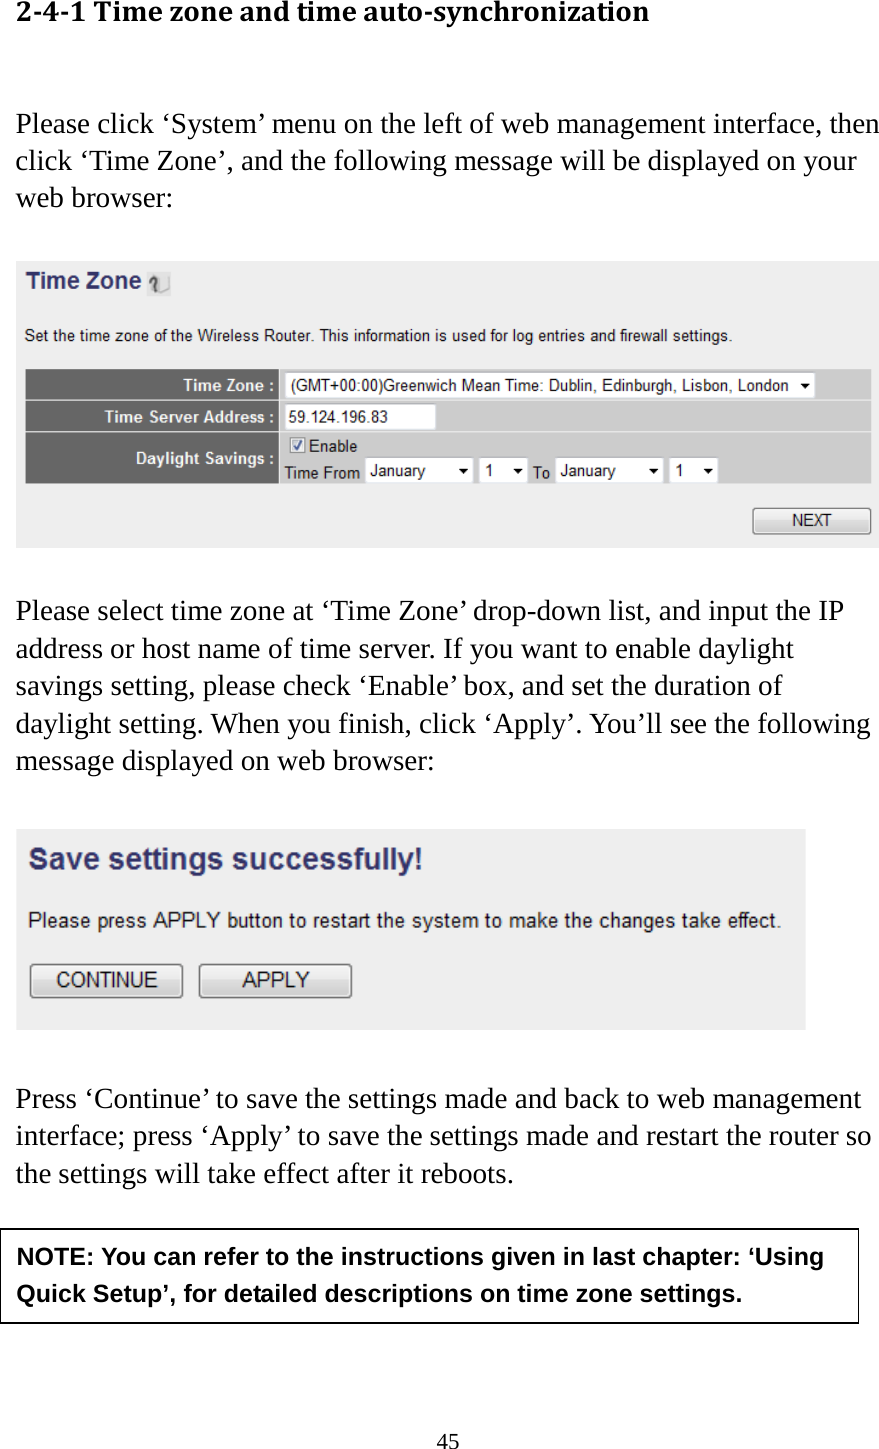 45 2-4-1 Time zone and time auto-synchronization  Please click ‘System’ menu on the left of web management interface, then click ‘Time Zone’, and the following message will be displayed on your web browser:    Please select time zone at ‘Time Zone’ drop-down list, and input the IP address or host name of time server. If you want to enable daylight savings setting, please check ‘Enable’ box, and set the duration of daylight setting. When you finish, click ‘Apply’. You’ll see the following message displayed on web browser:    Press ‘Continue’ to save the settings made and back to web management interface; press ‘Apply’ to save the settings made and restart the router so the settings will take effect after it reboots.      NOTE: You can refer to the instructions given in last chapter: ‘Using Quick Setup’, for detailed descriptions on time zone settings. 